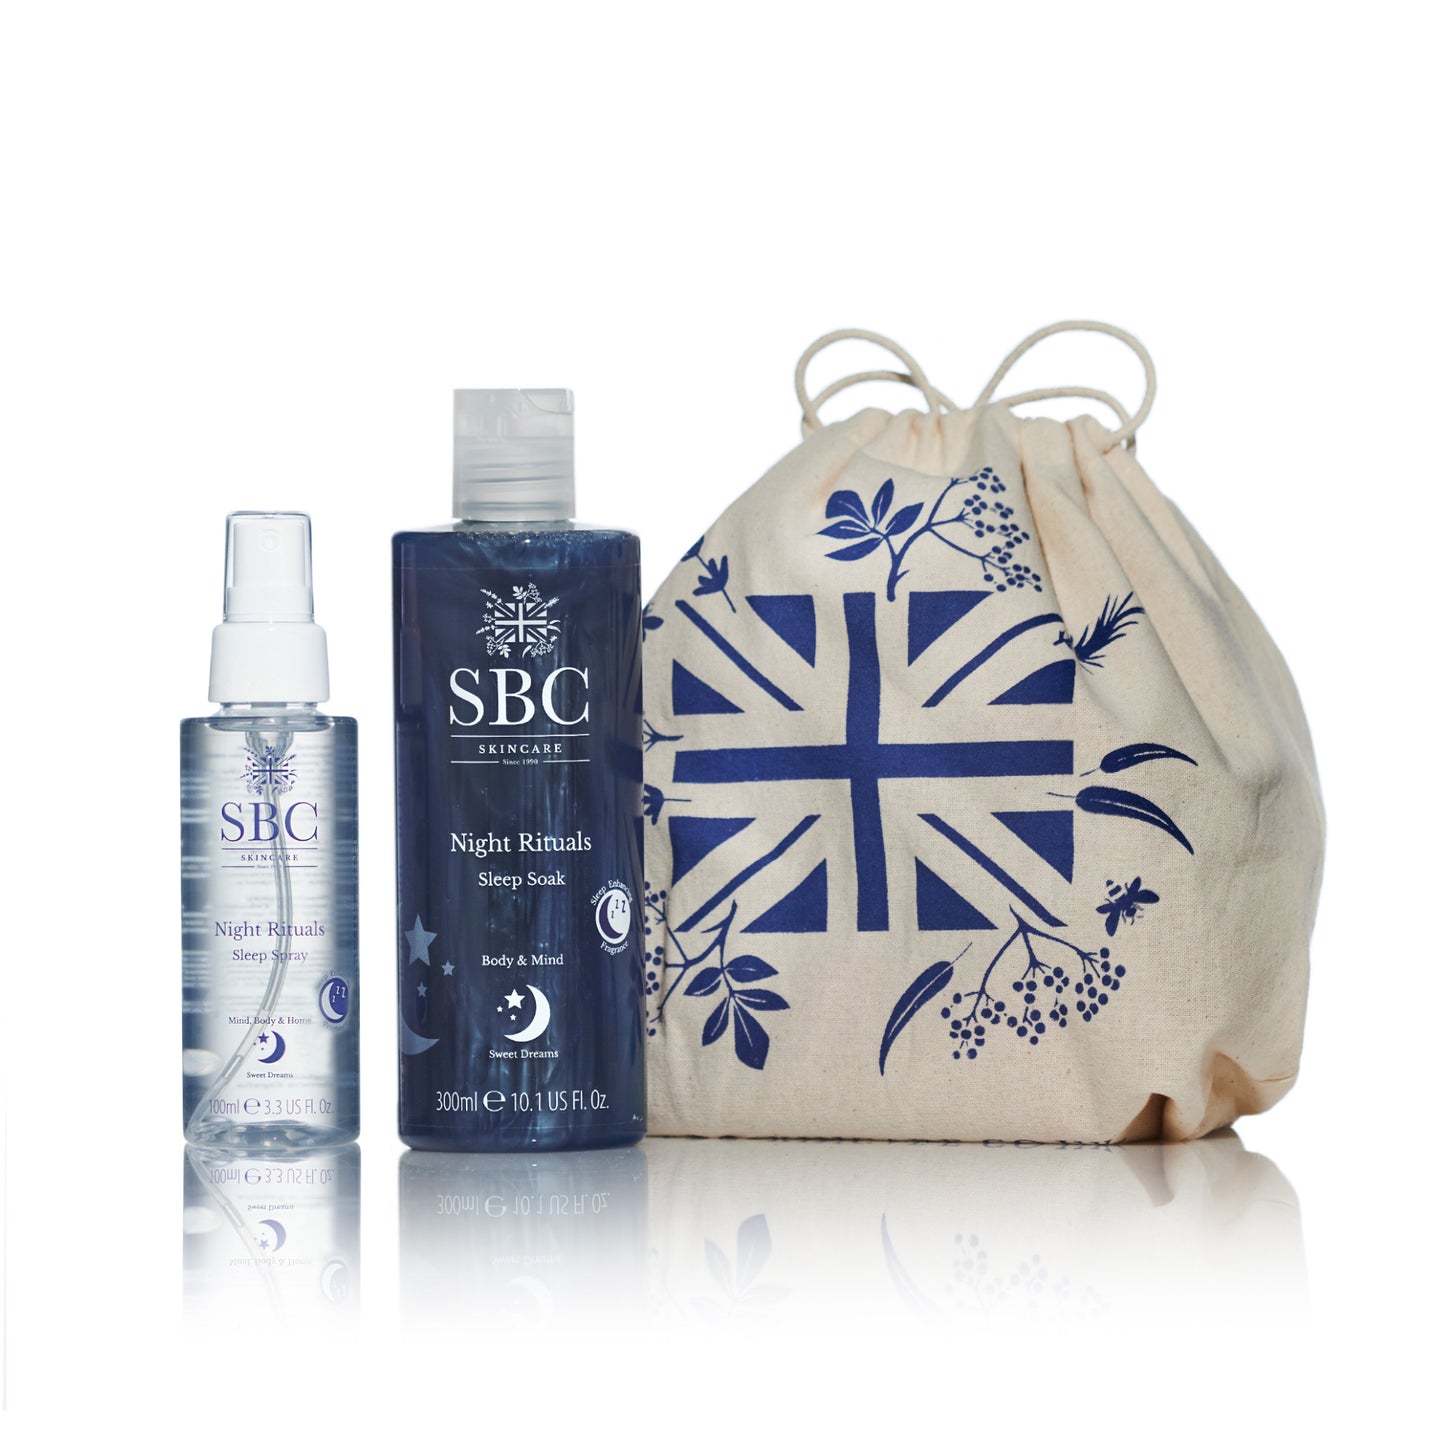  SBC Skincare's Night Rituals Sleep Soak and Spray  with cotton bag on a white background